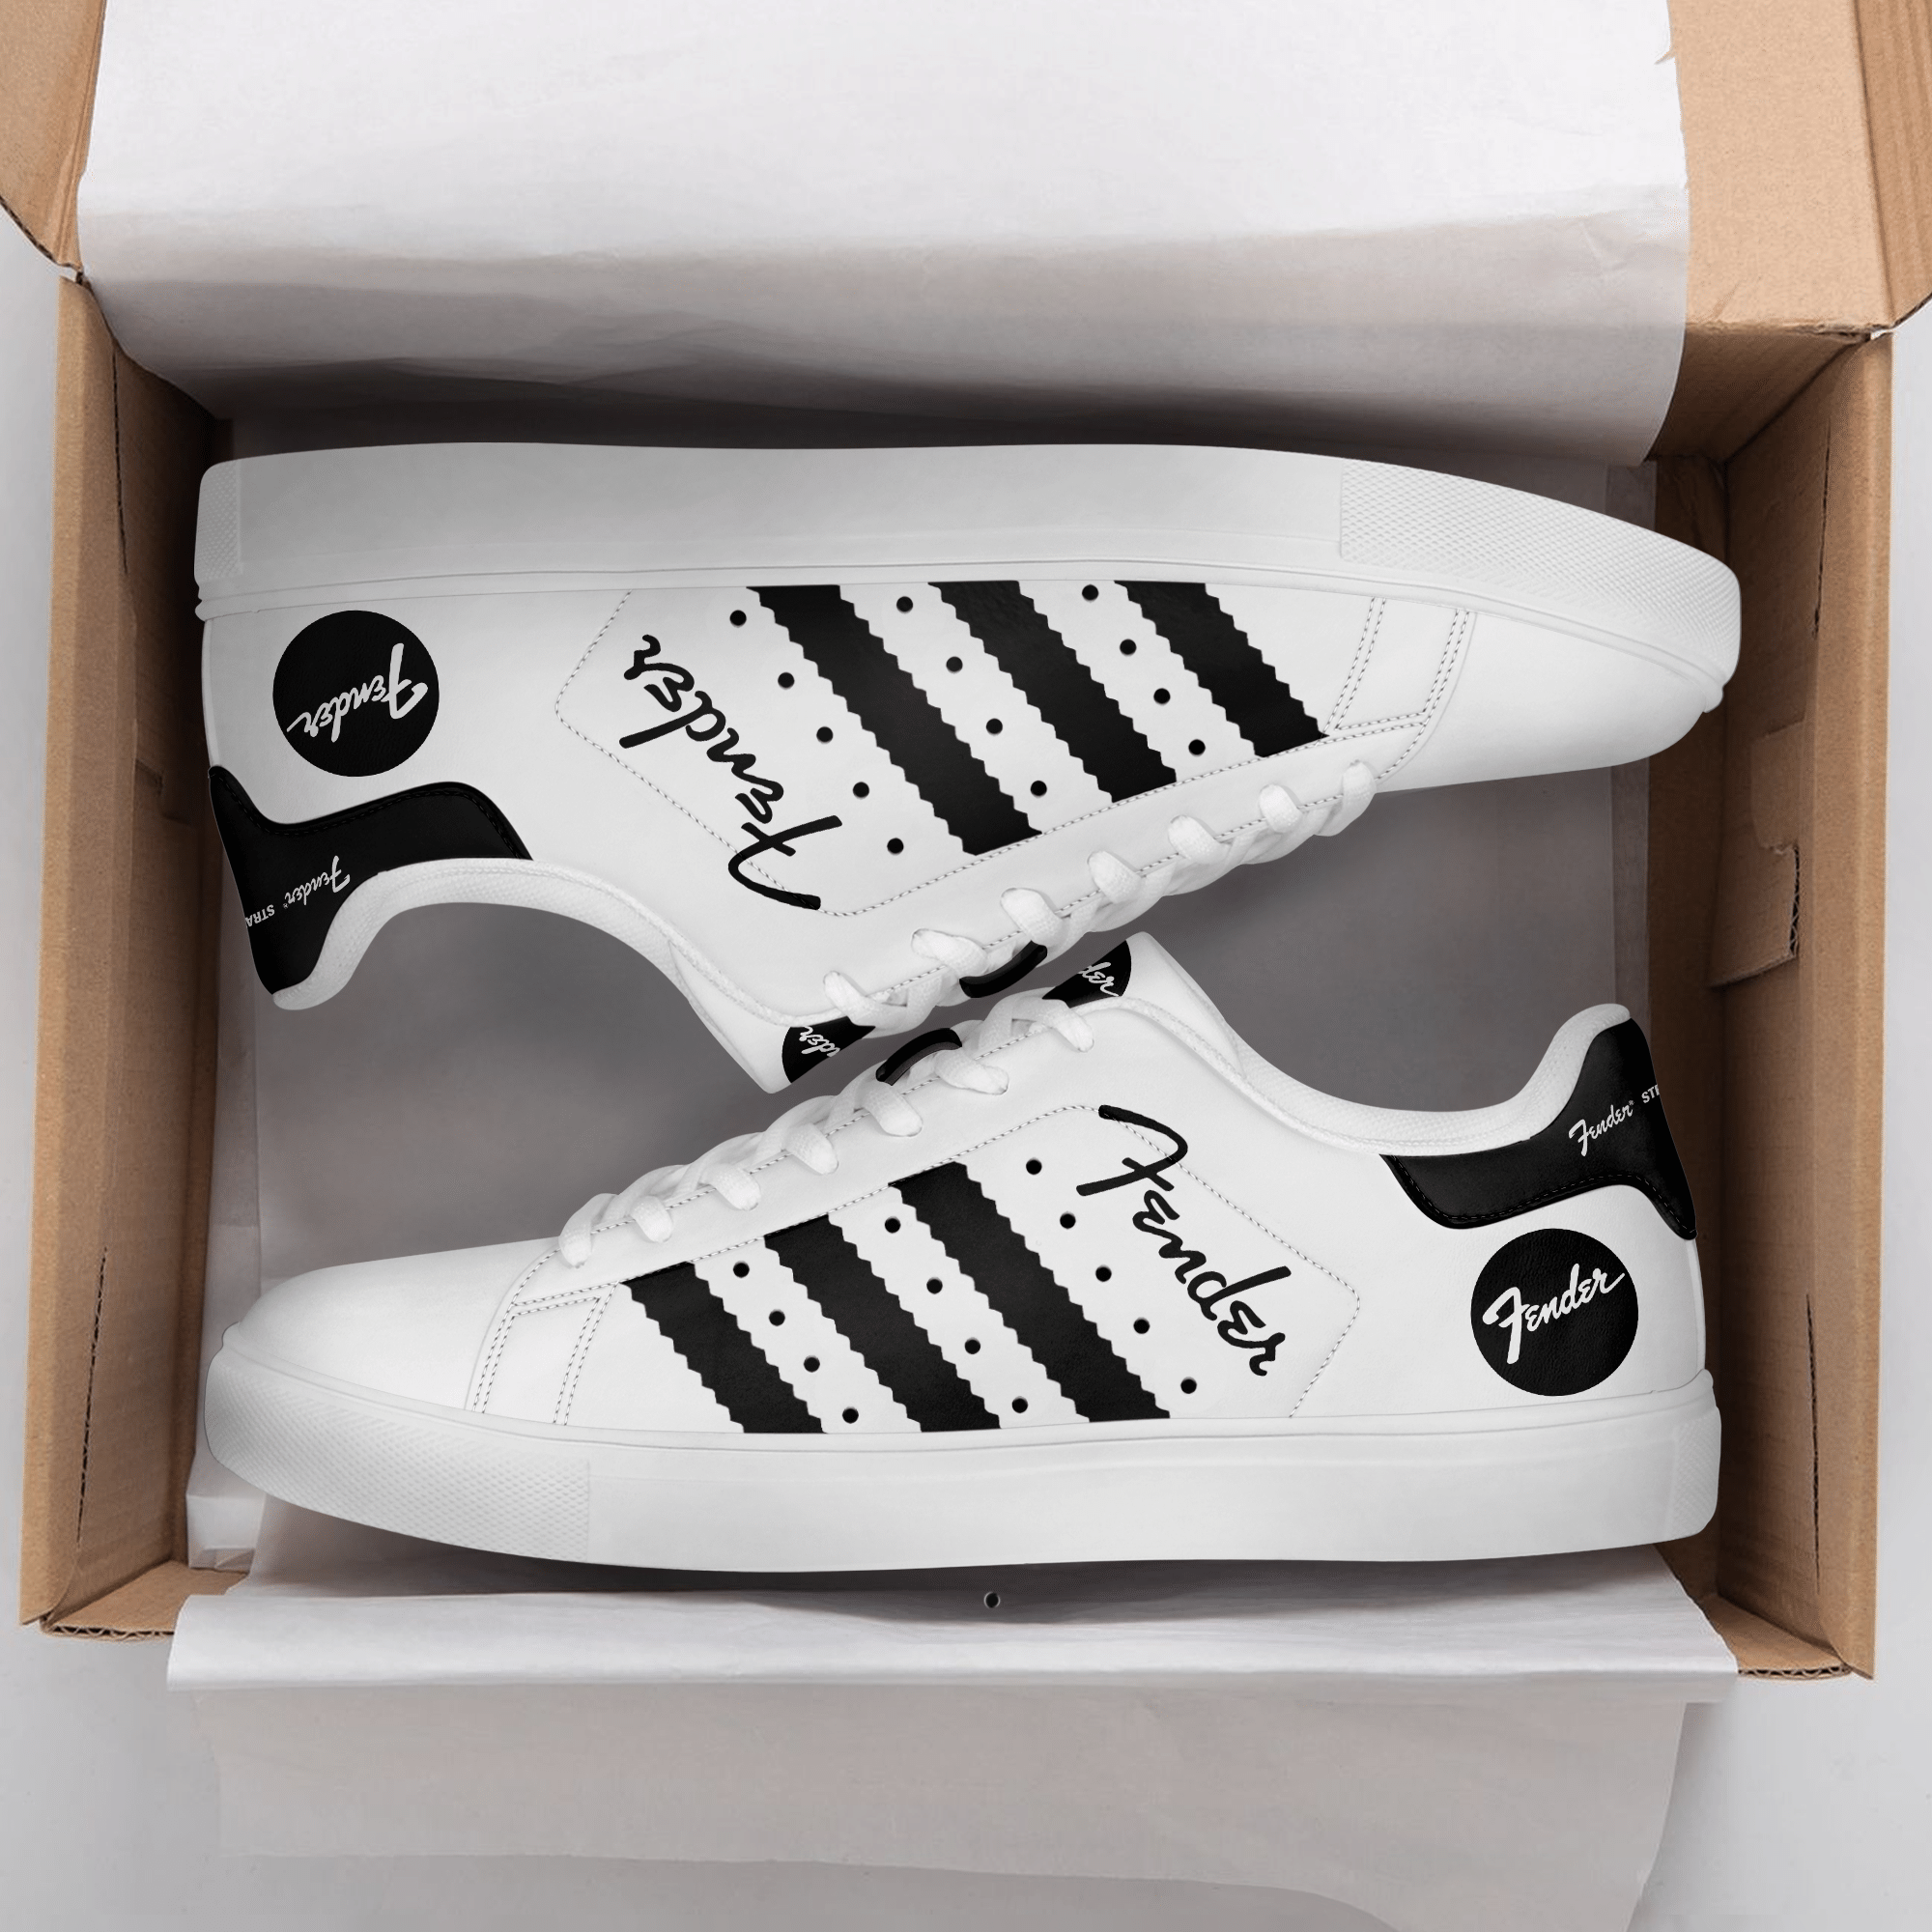 Order new clunky sneakers today and you'll be ready to go! 40